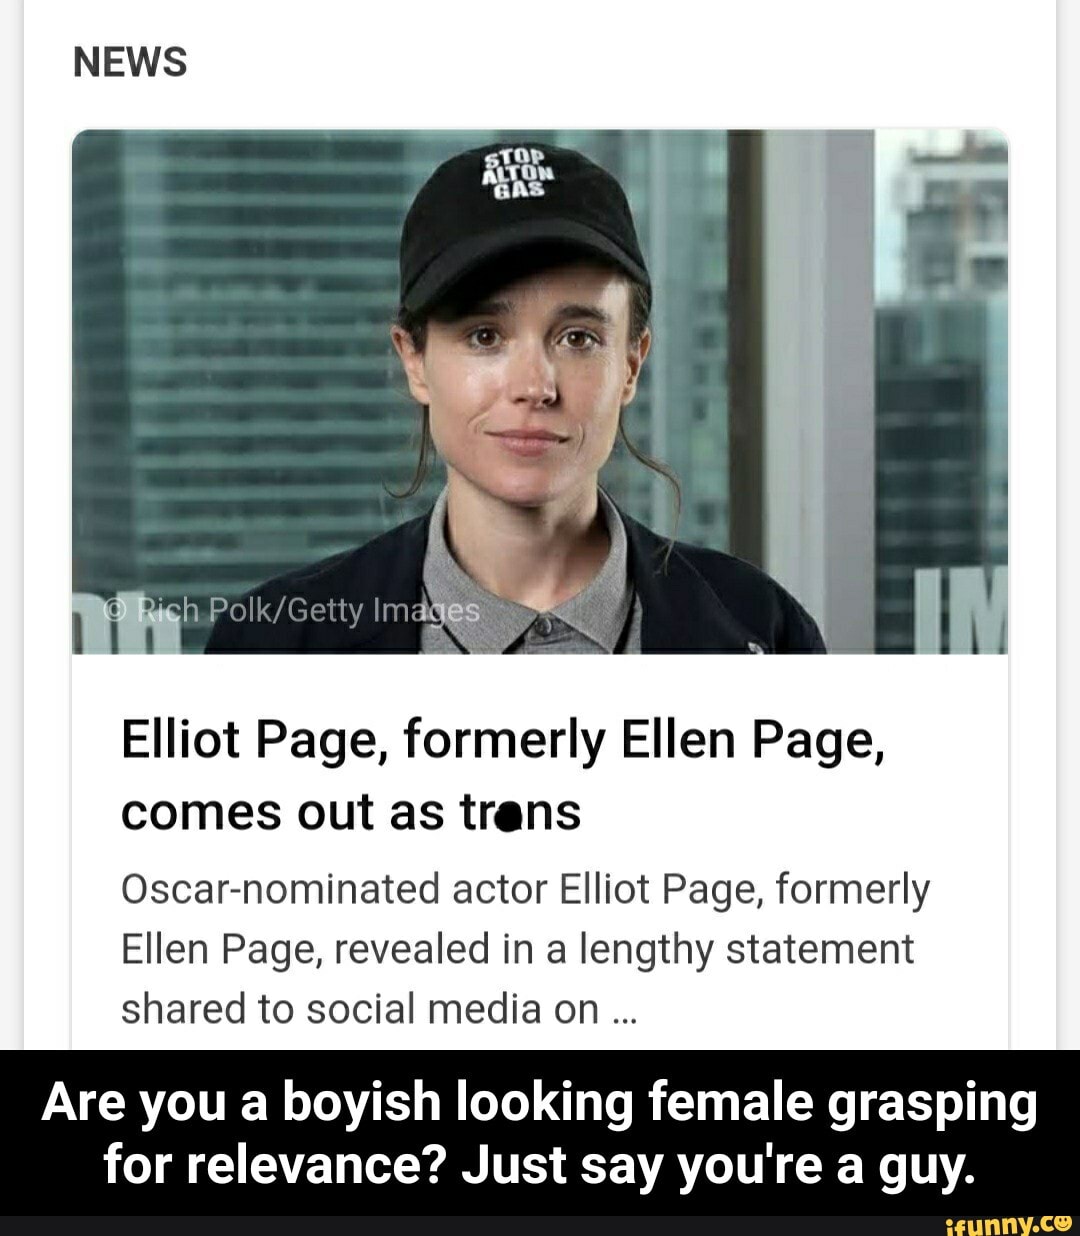 News Bich Imalyes Elliot Page Formerly Ellen Page Comes Out As Trans Oscarnominated Actor Elliot Page Formerly Ellen Page Revealed In A Lengthy Statement Shared To Social Media On Are You Boyish